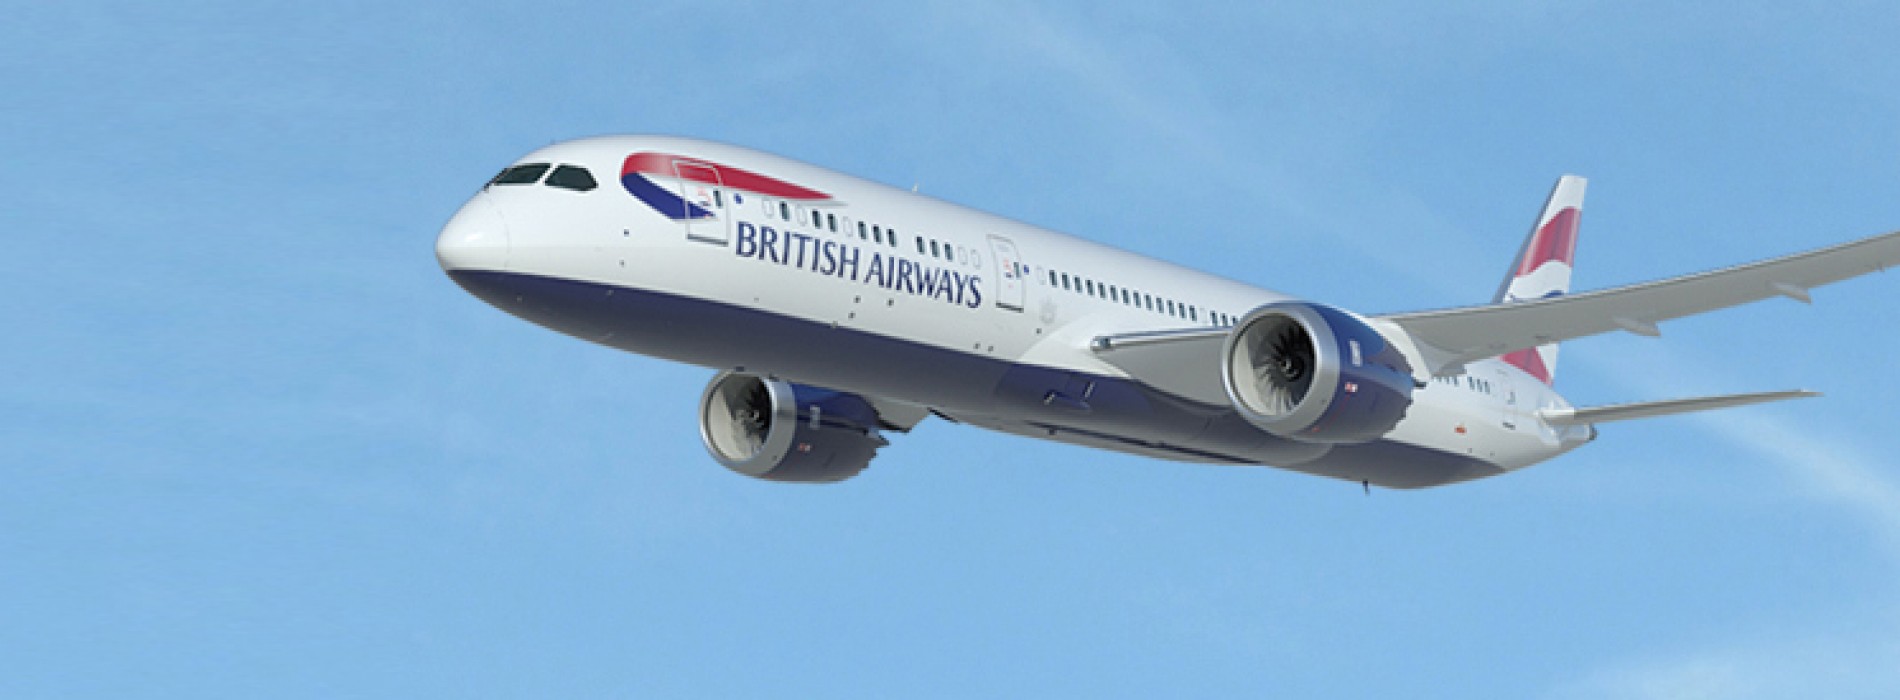 Delhi to be the inaugural route for British Airways’ Boeing 787-9